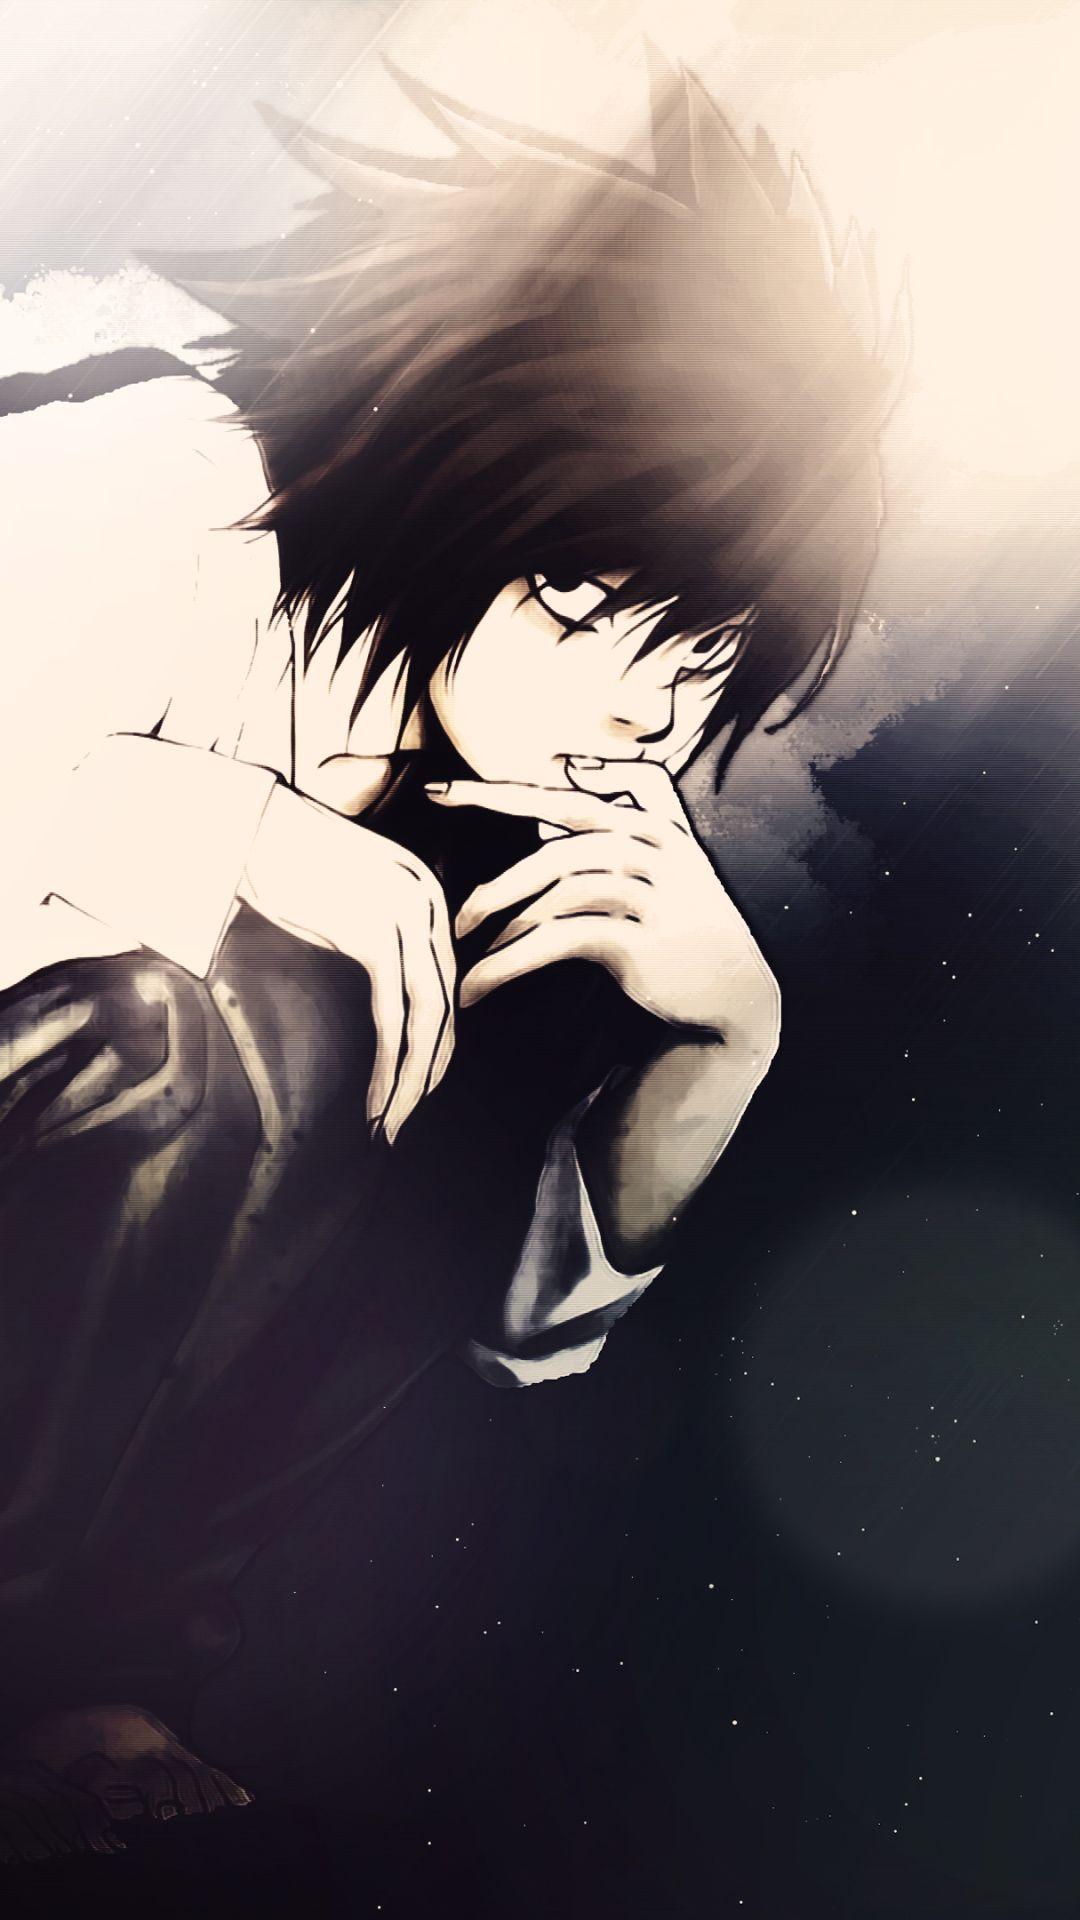 view 29 death note wallpaper aesthetic ultrasafe wallpaper on l death note aesthetic wallpapers